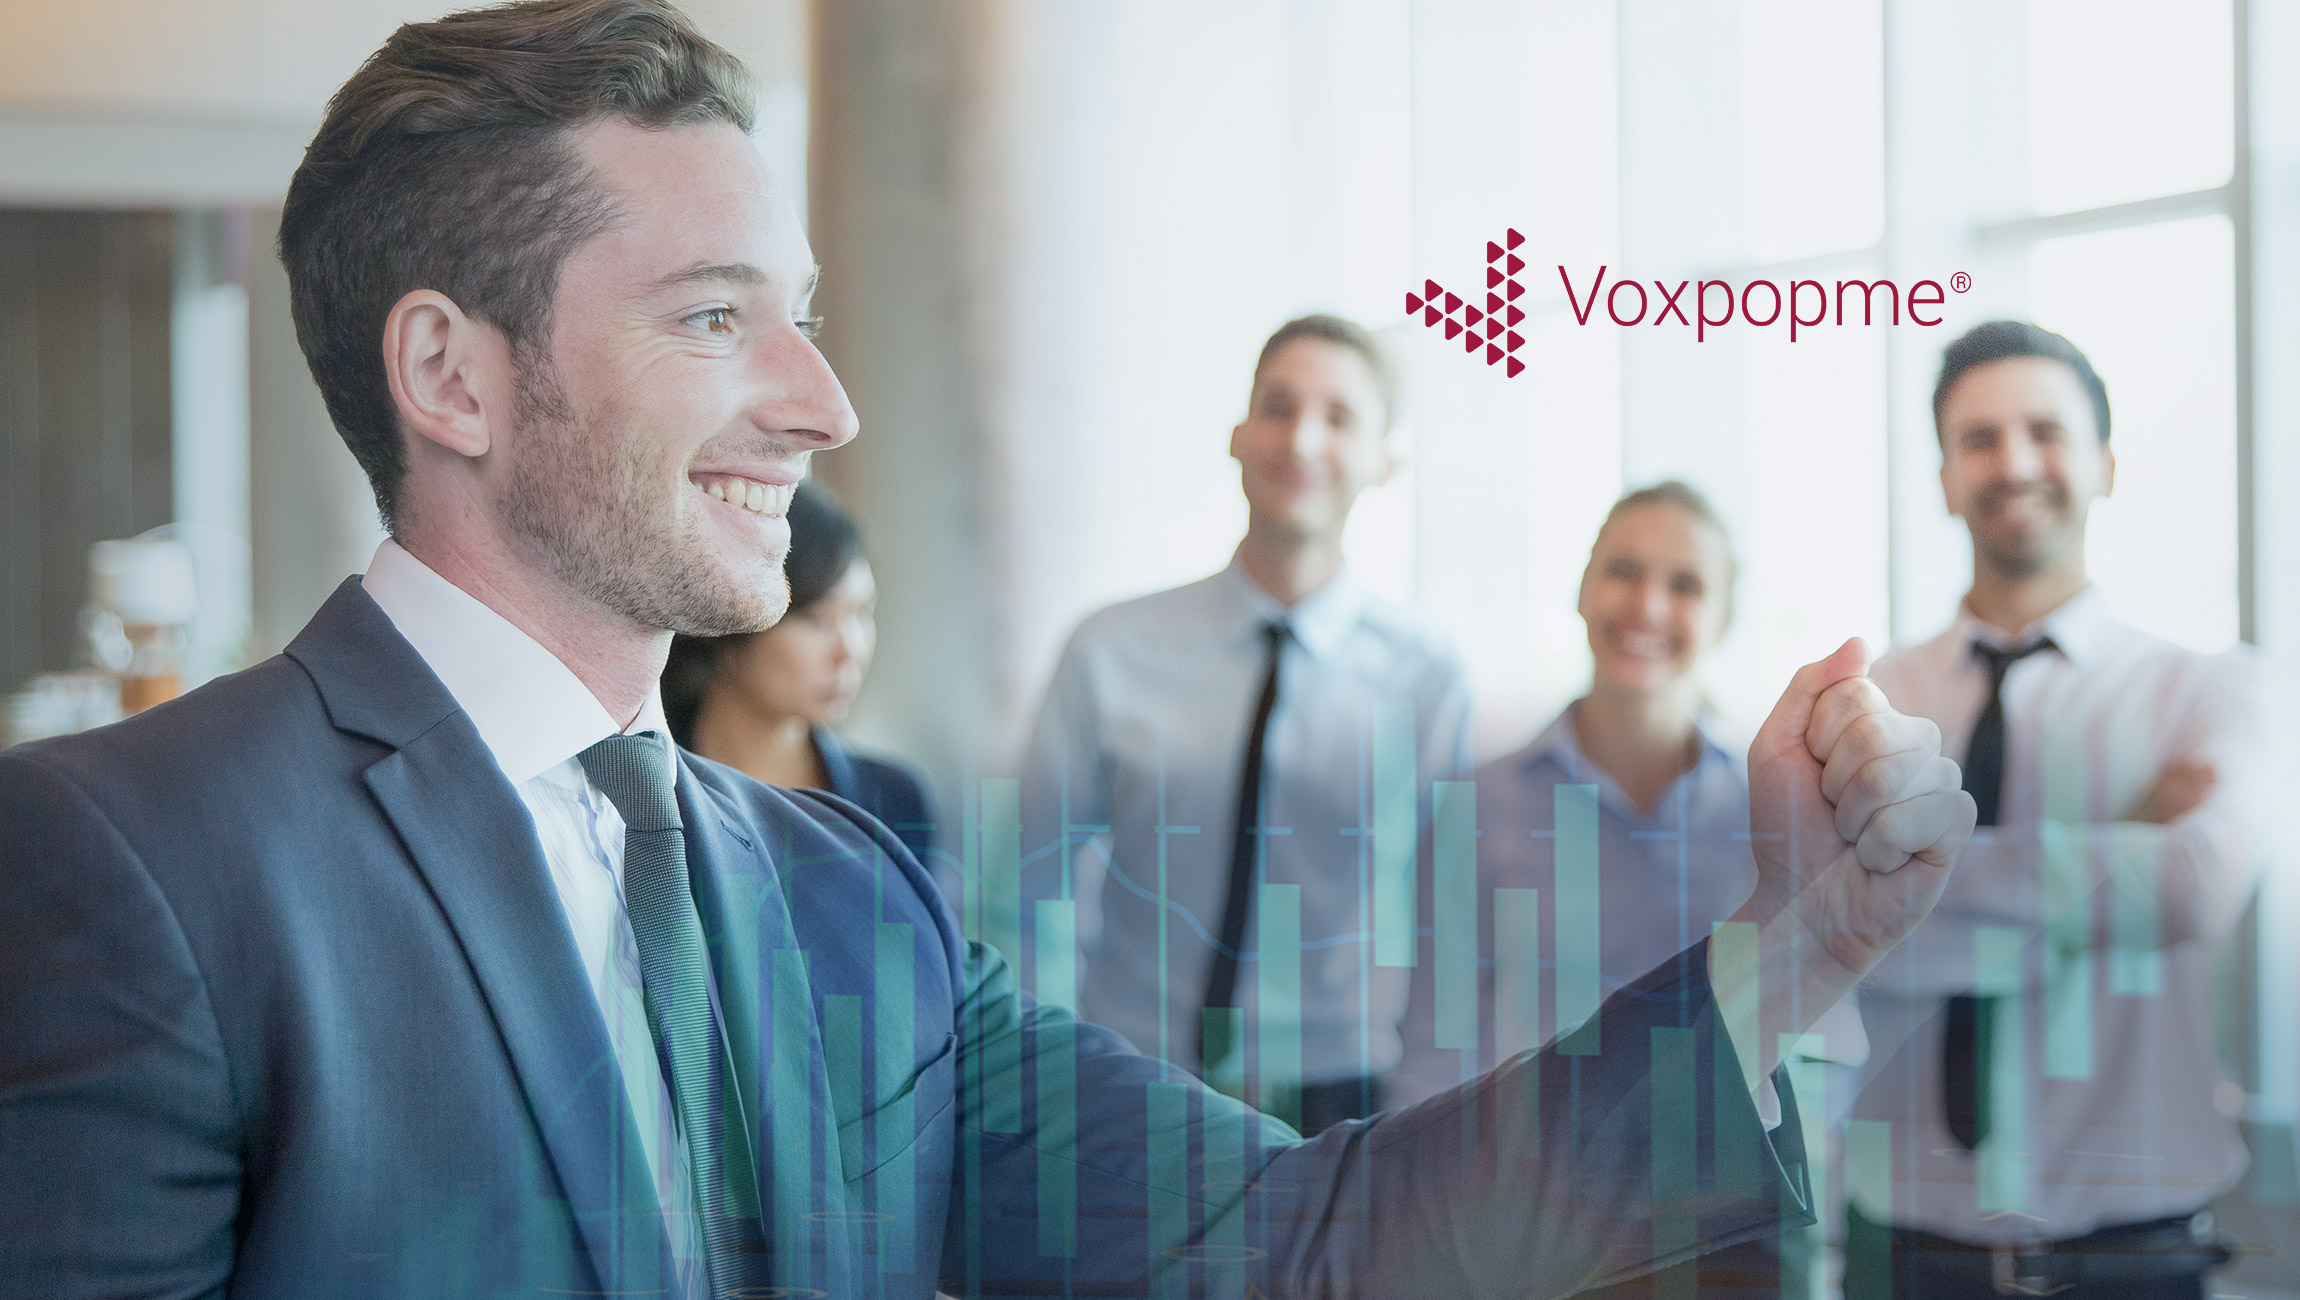 Alida Partners with Voxpopme to Enhance Alida CXM and Insights Platform with Video Feedback